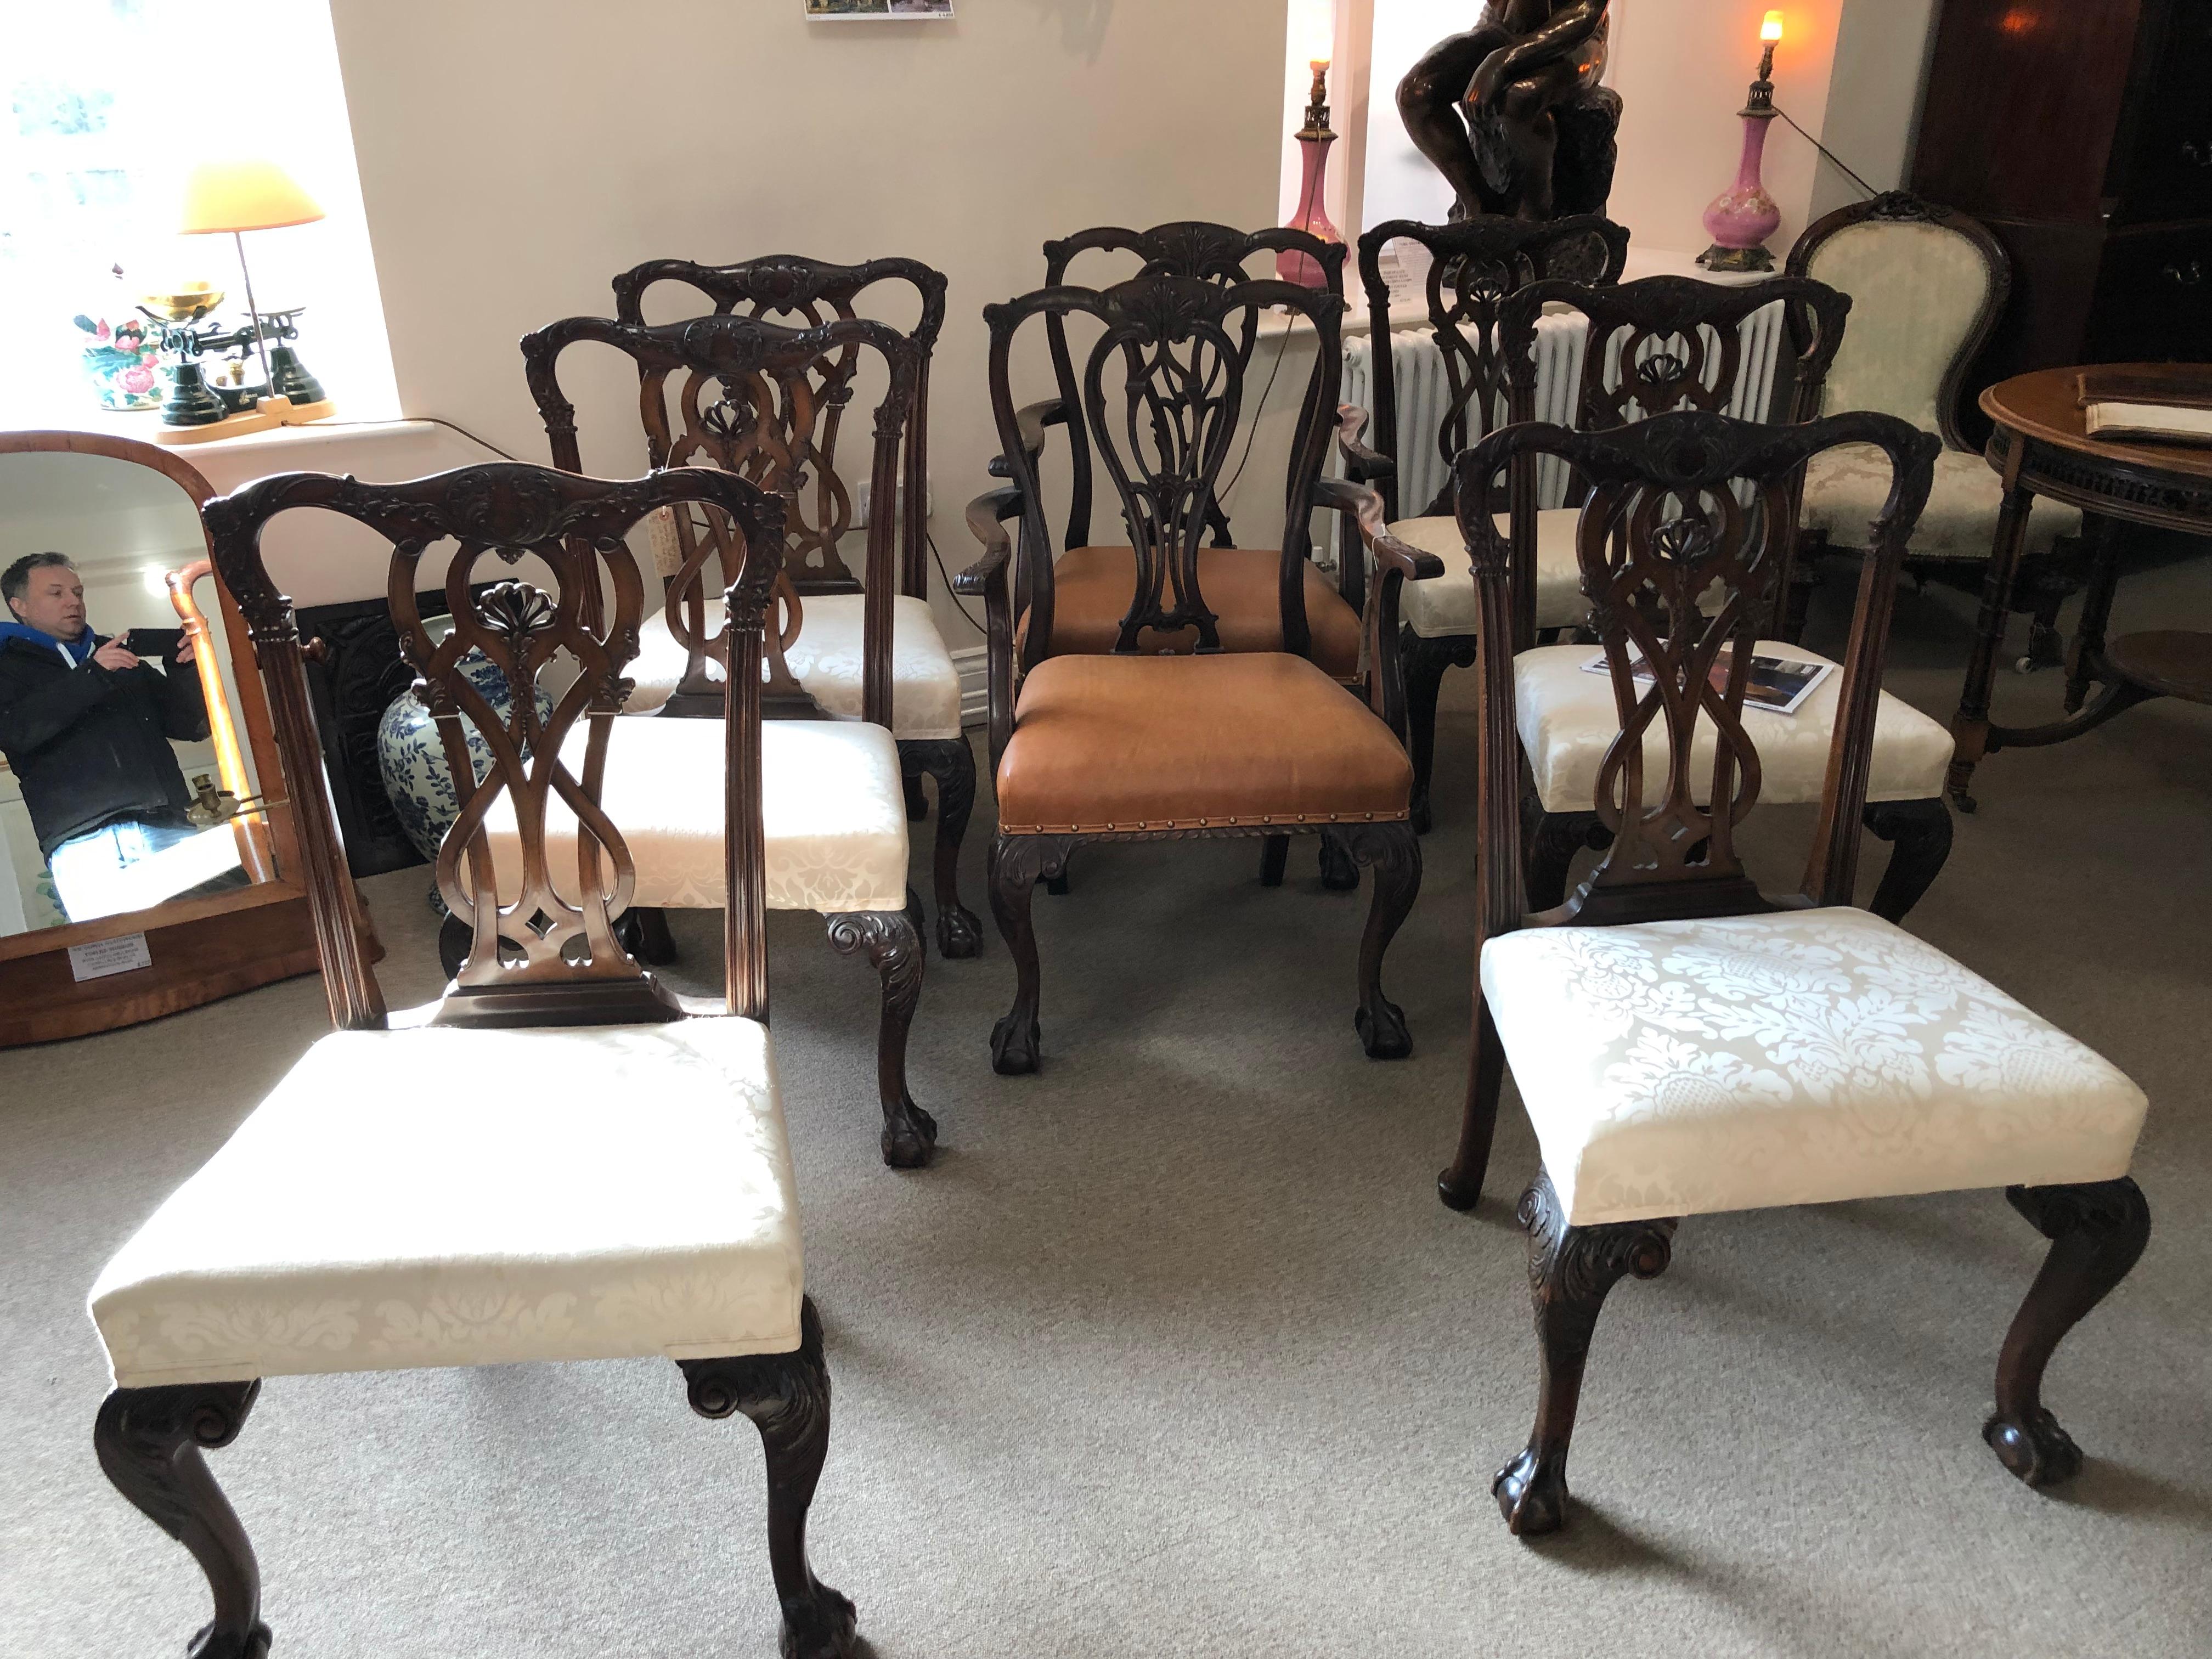 A very handsome set of six solid mahogany beautifully carved Chippendale design 19th century George III style dining chairs on ball and claw feet with damask fabric.
Two very similar carver chairs also available, as pictured.